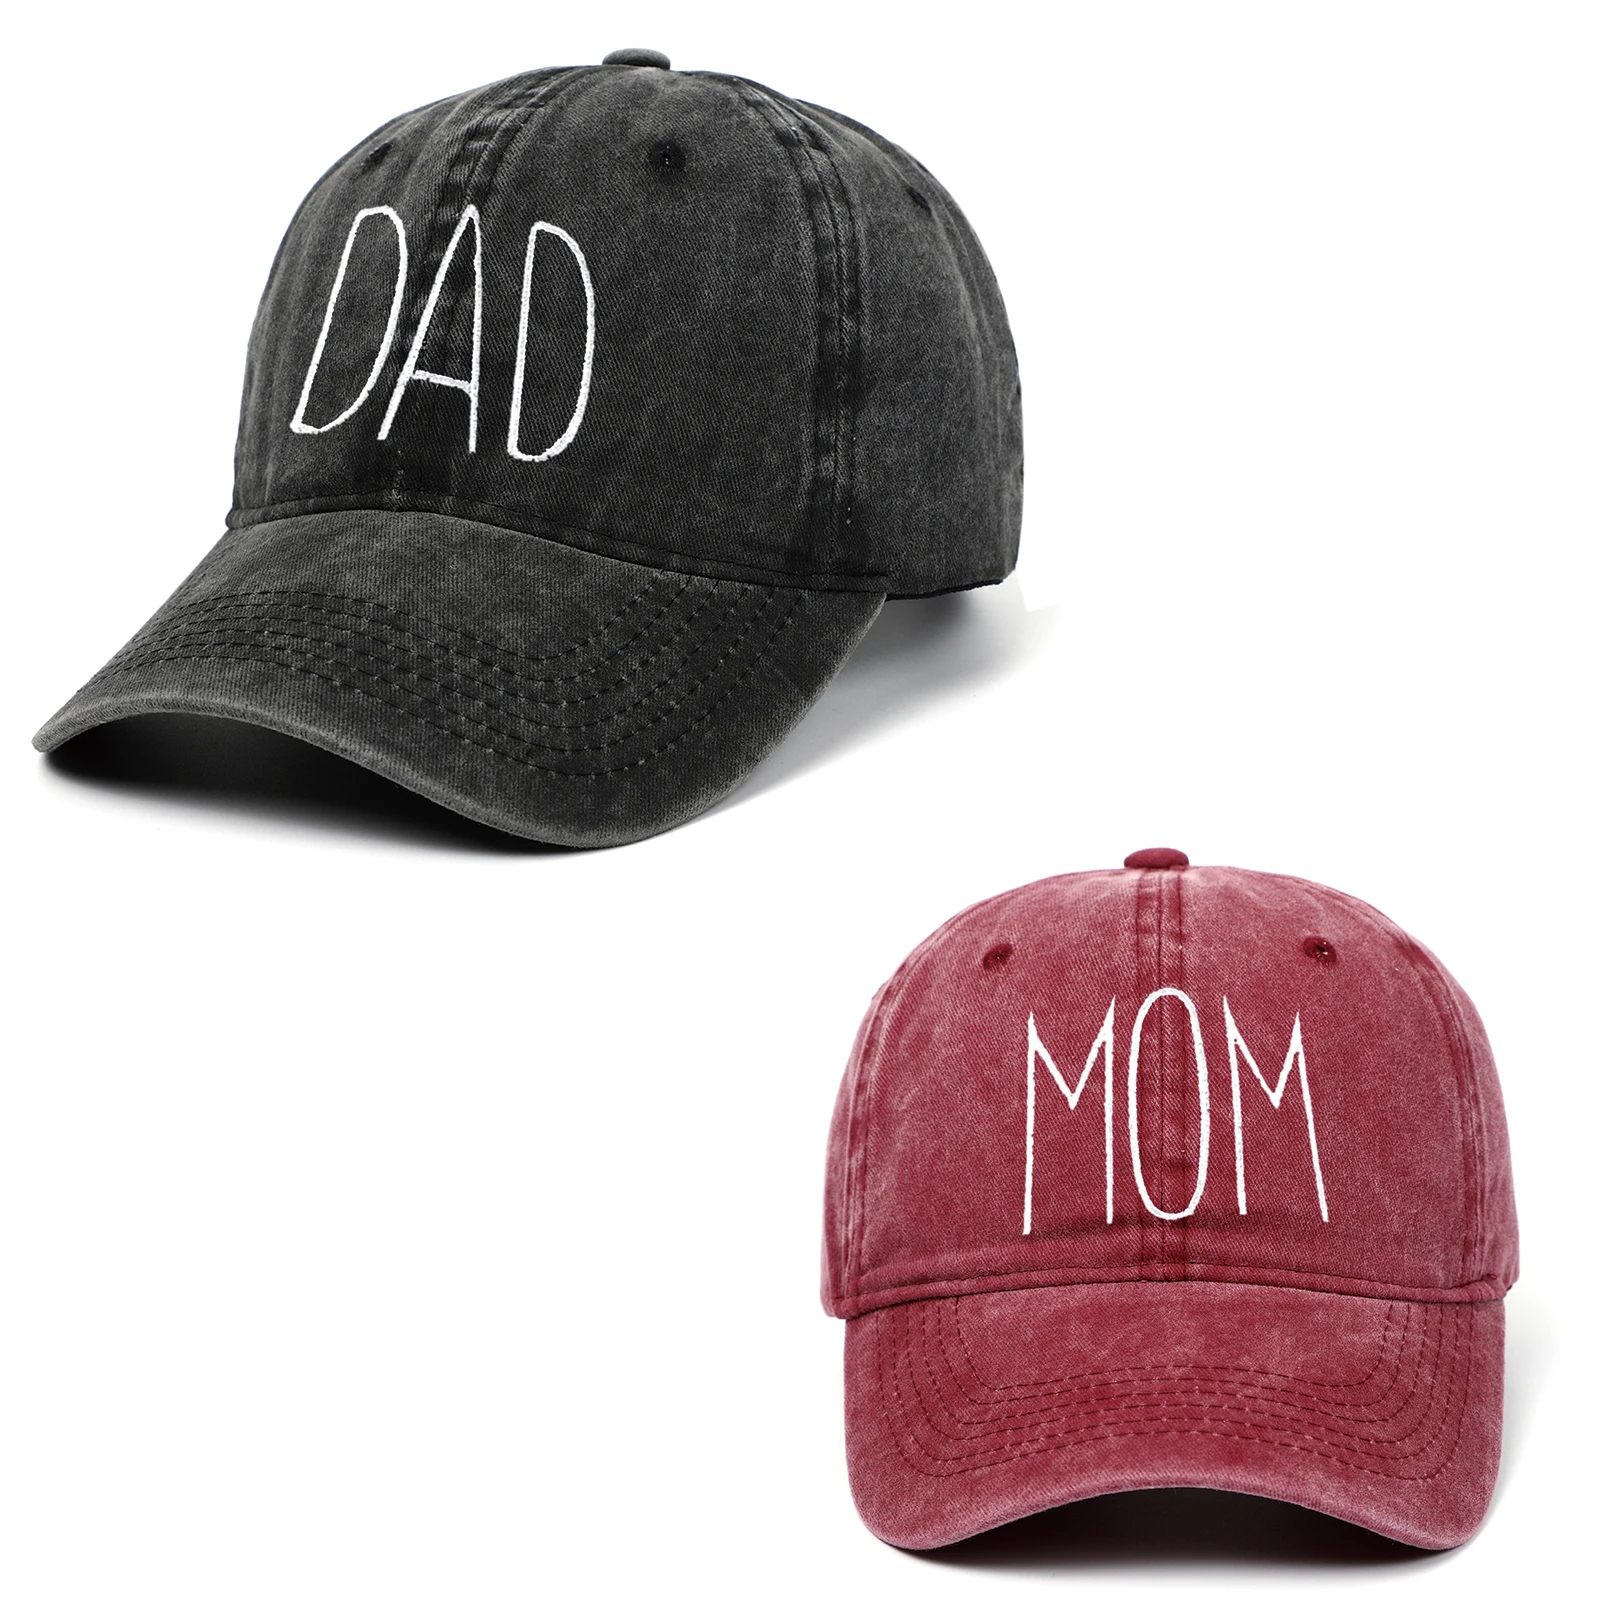 DAD MOM Letters Embroidery Baseball Cap 100% Cotton Washed Fisherman's Hat Fashion Couple Snapback Men Trucker Hats Hip-hop Caps